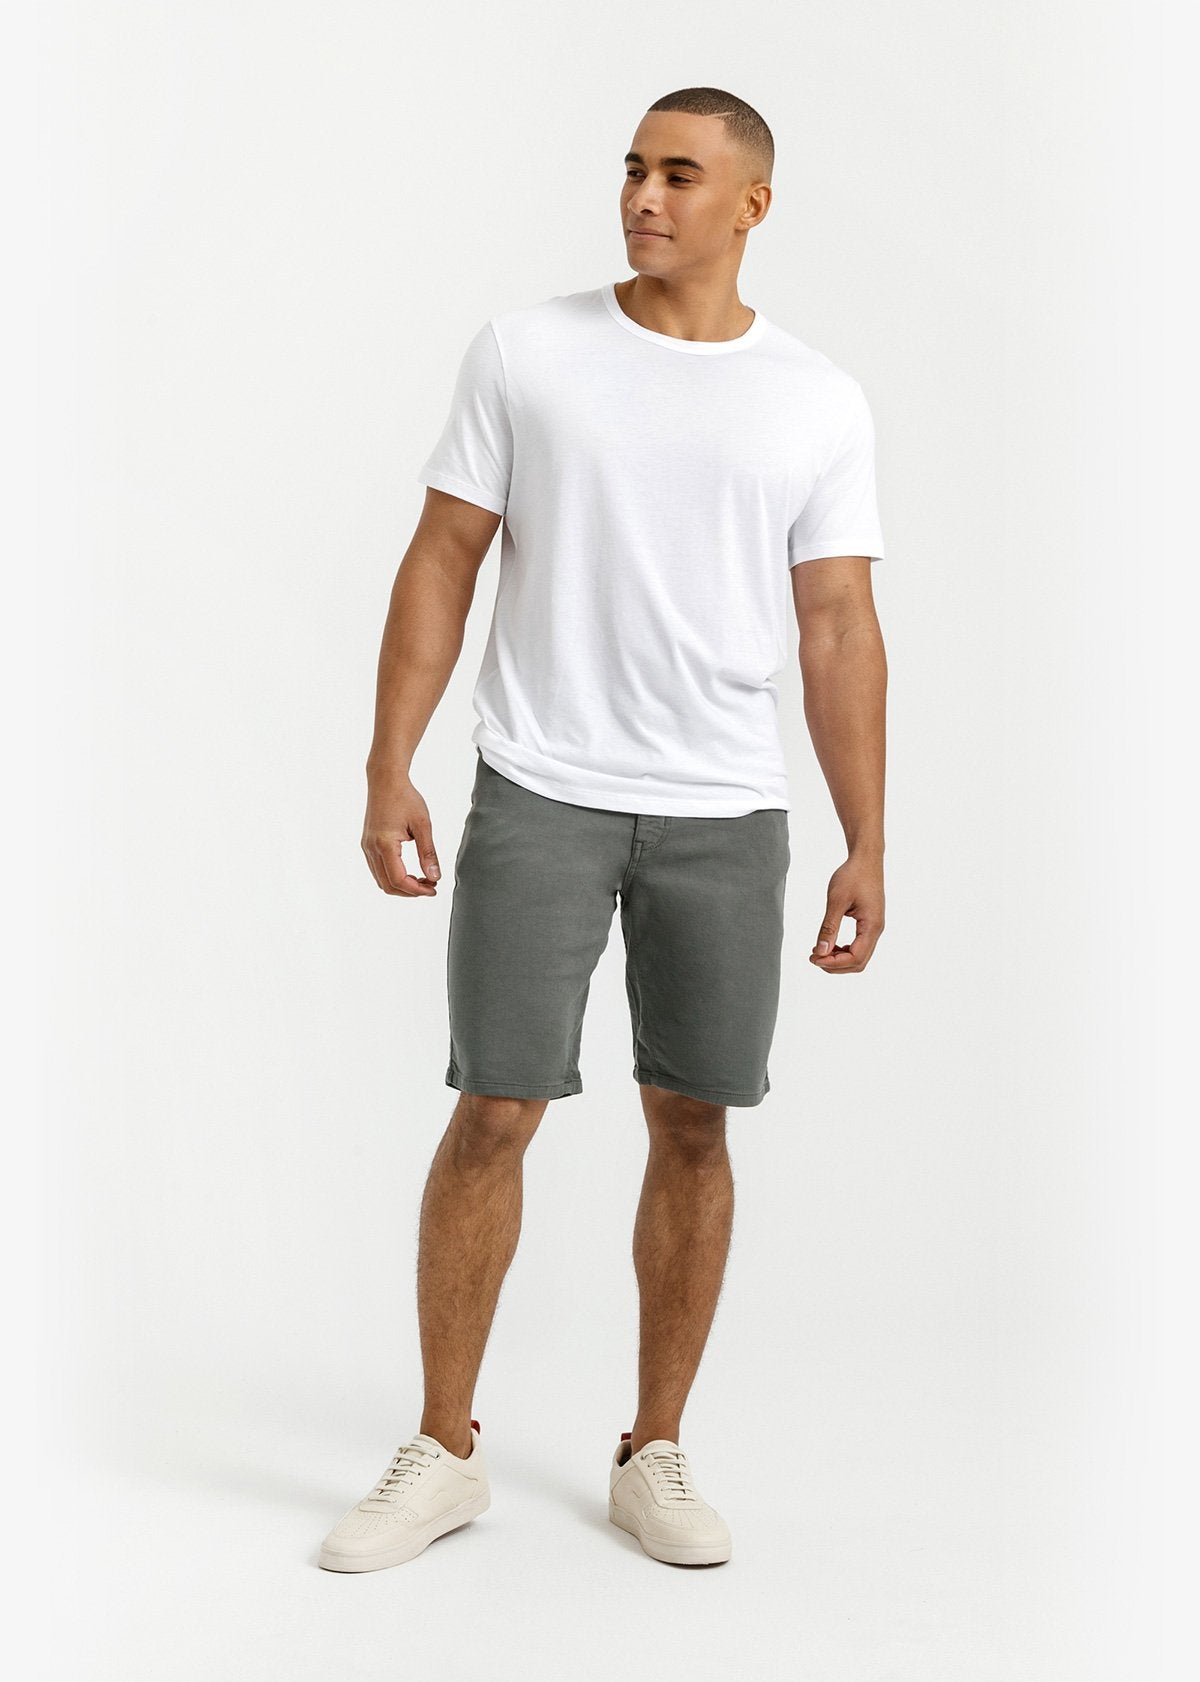  Sweat Shorts for Men Relaxed Fit Pants for Men Mens 3